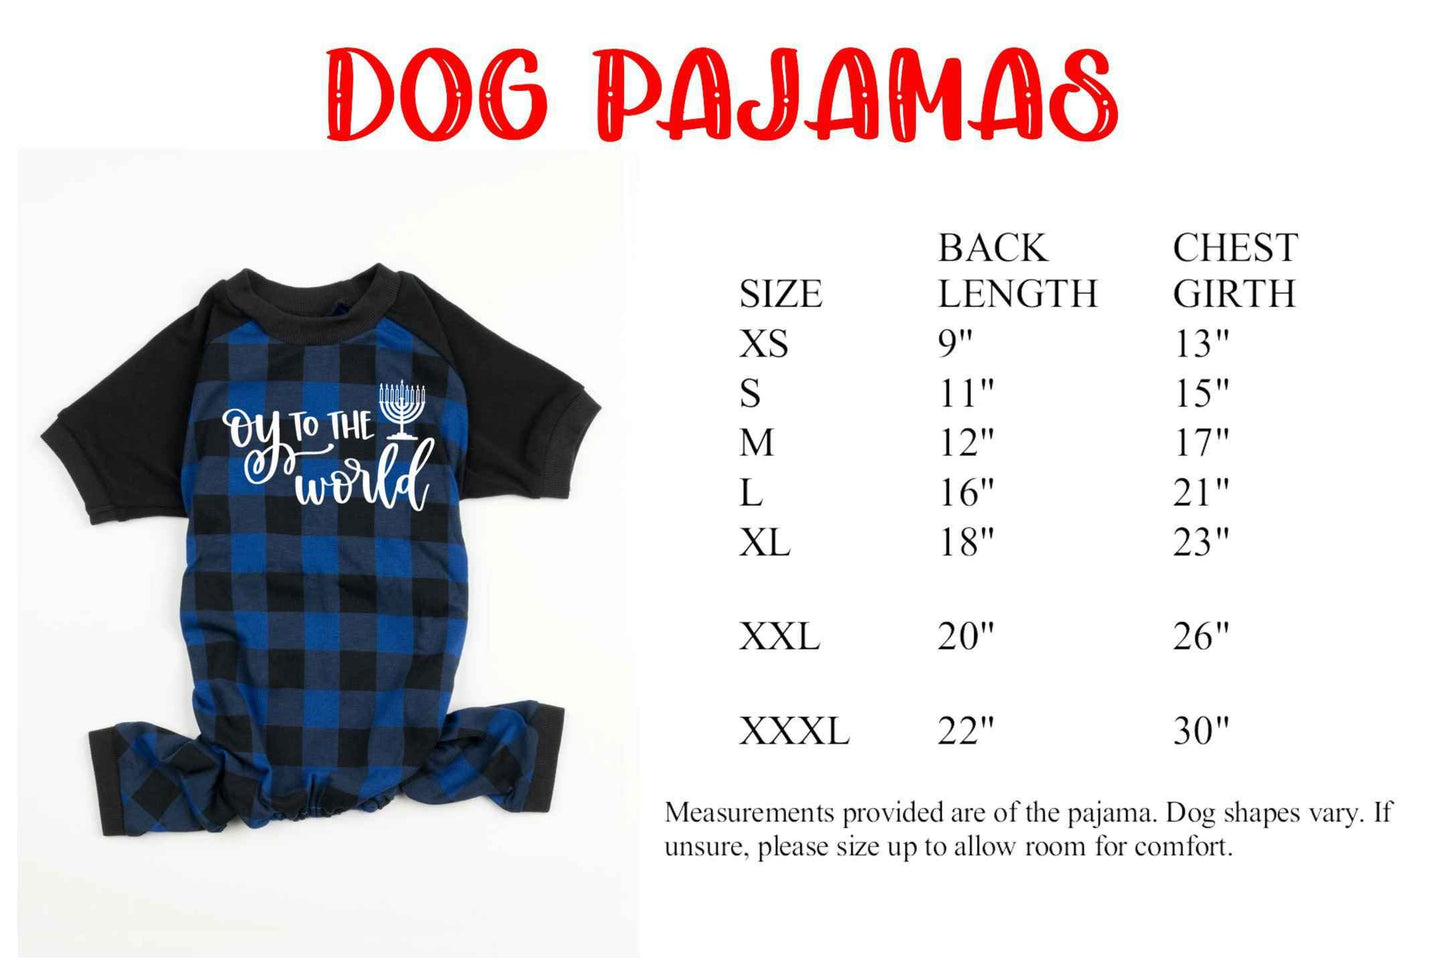 Oy to the World Blue Plaid Family Chanukah Pajamas, hanukkah family pajamas - women's hanukkah jammies - matching family chanukah pjs